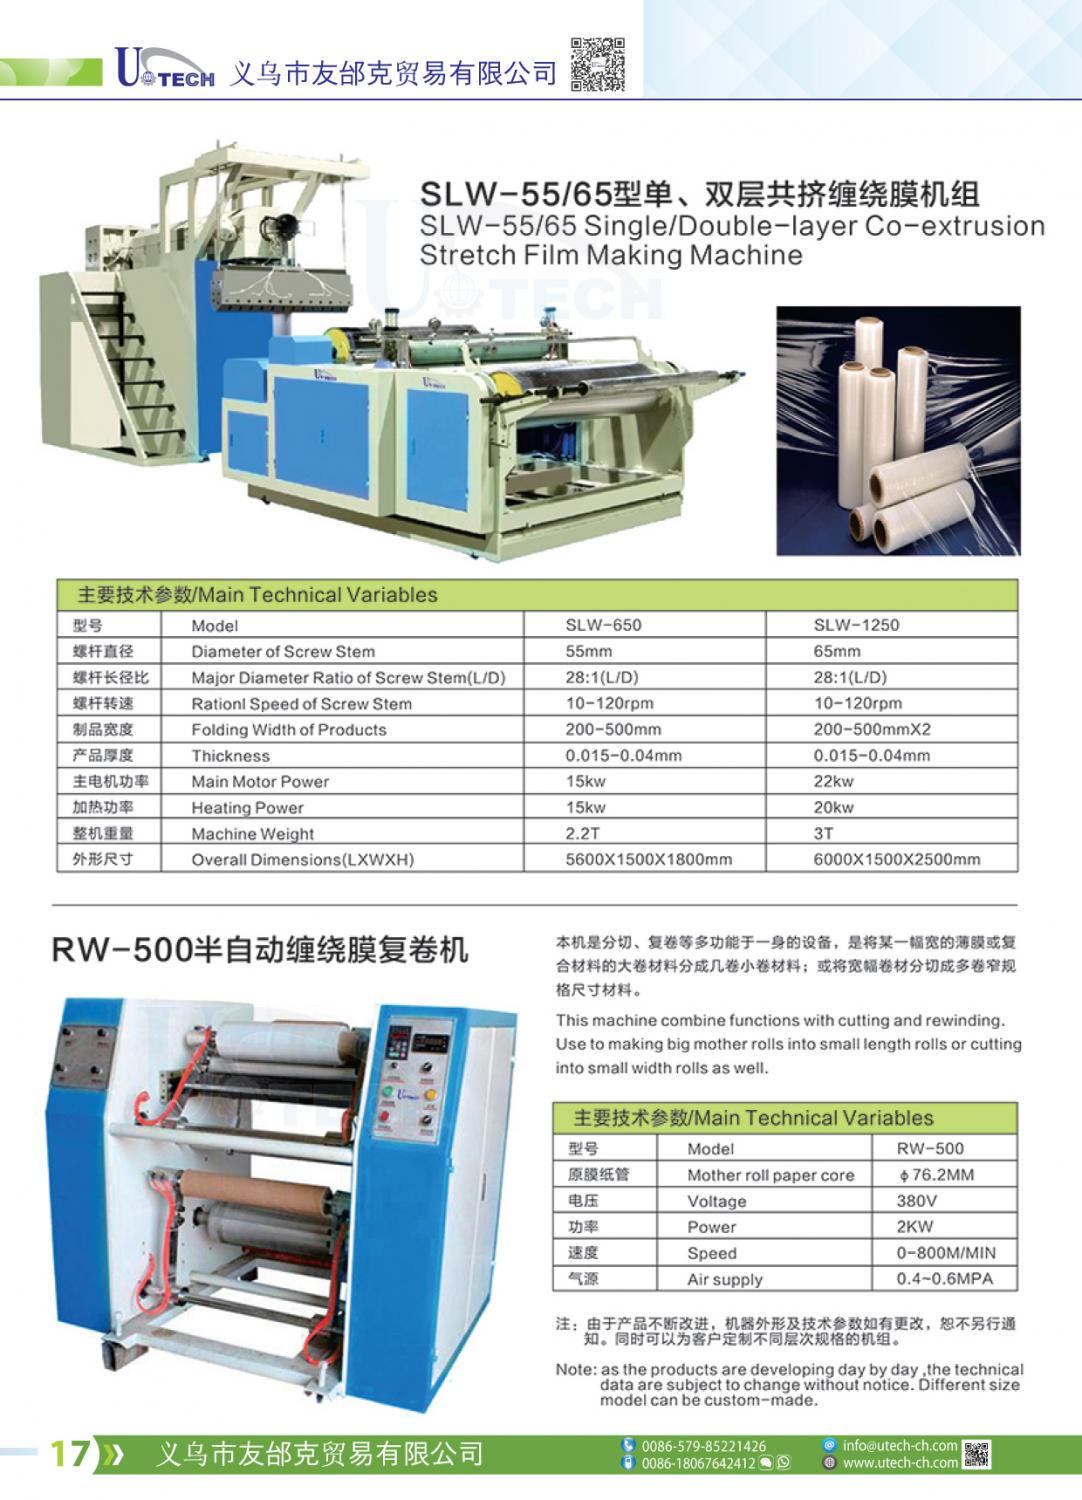 SLW-55/65 Single/Double-layer Co-extrusion